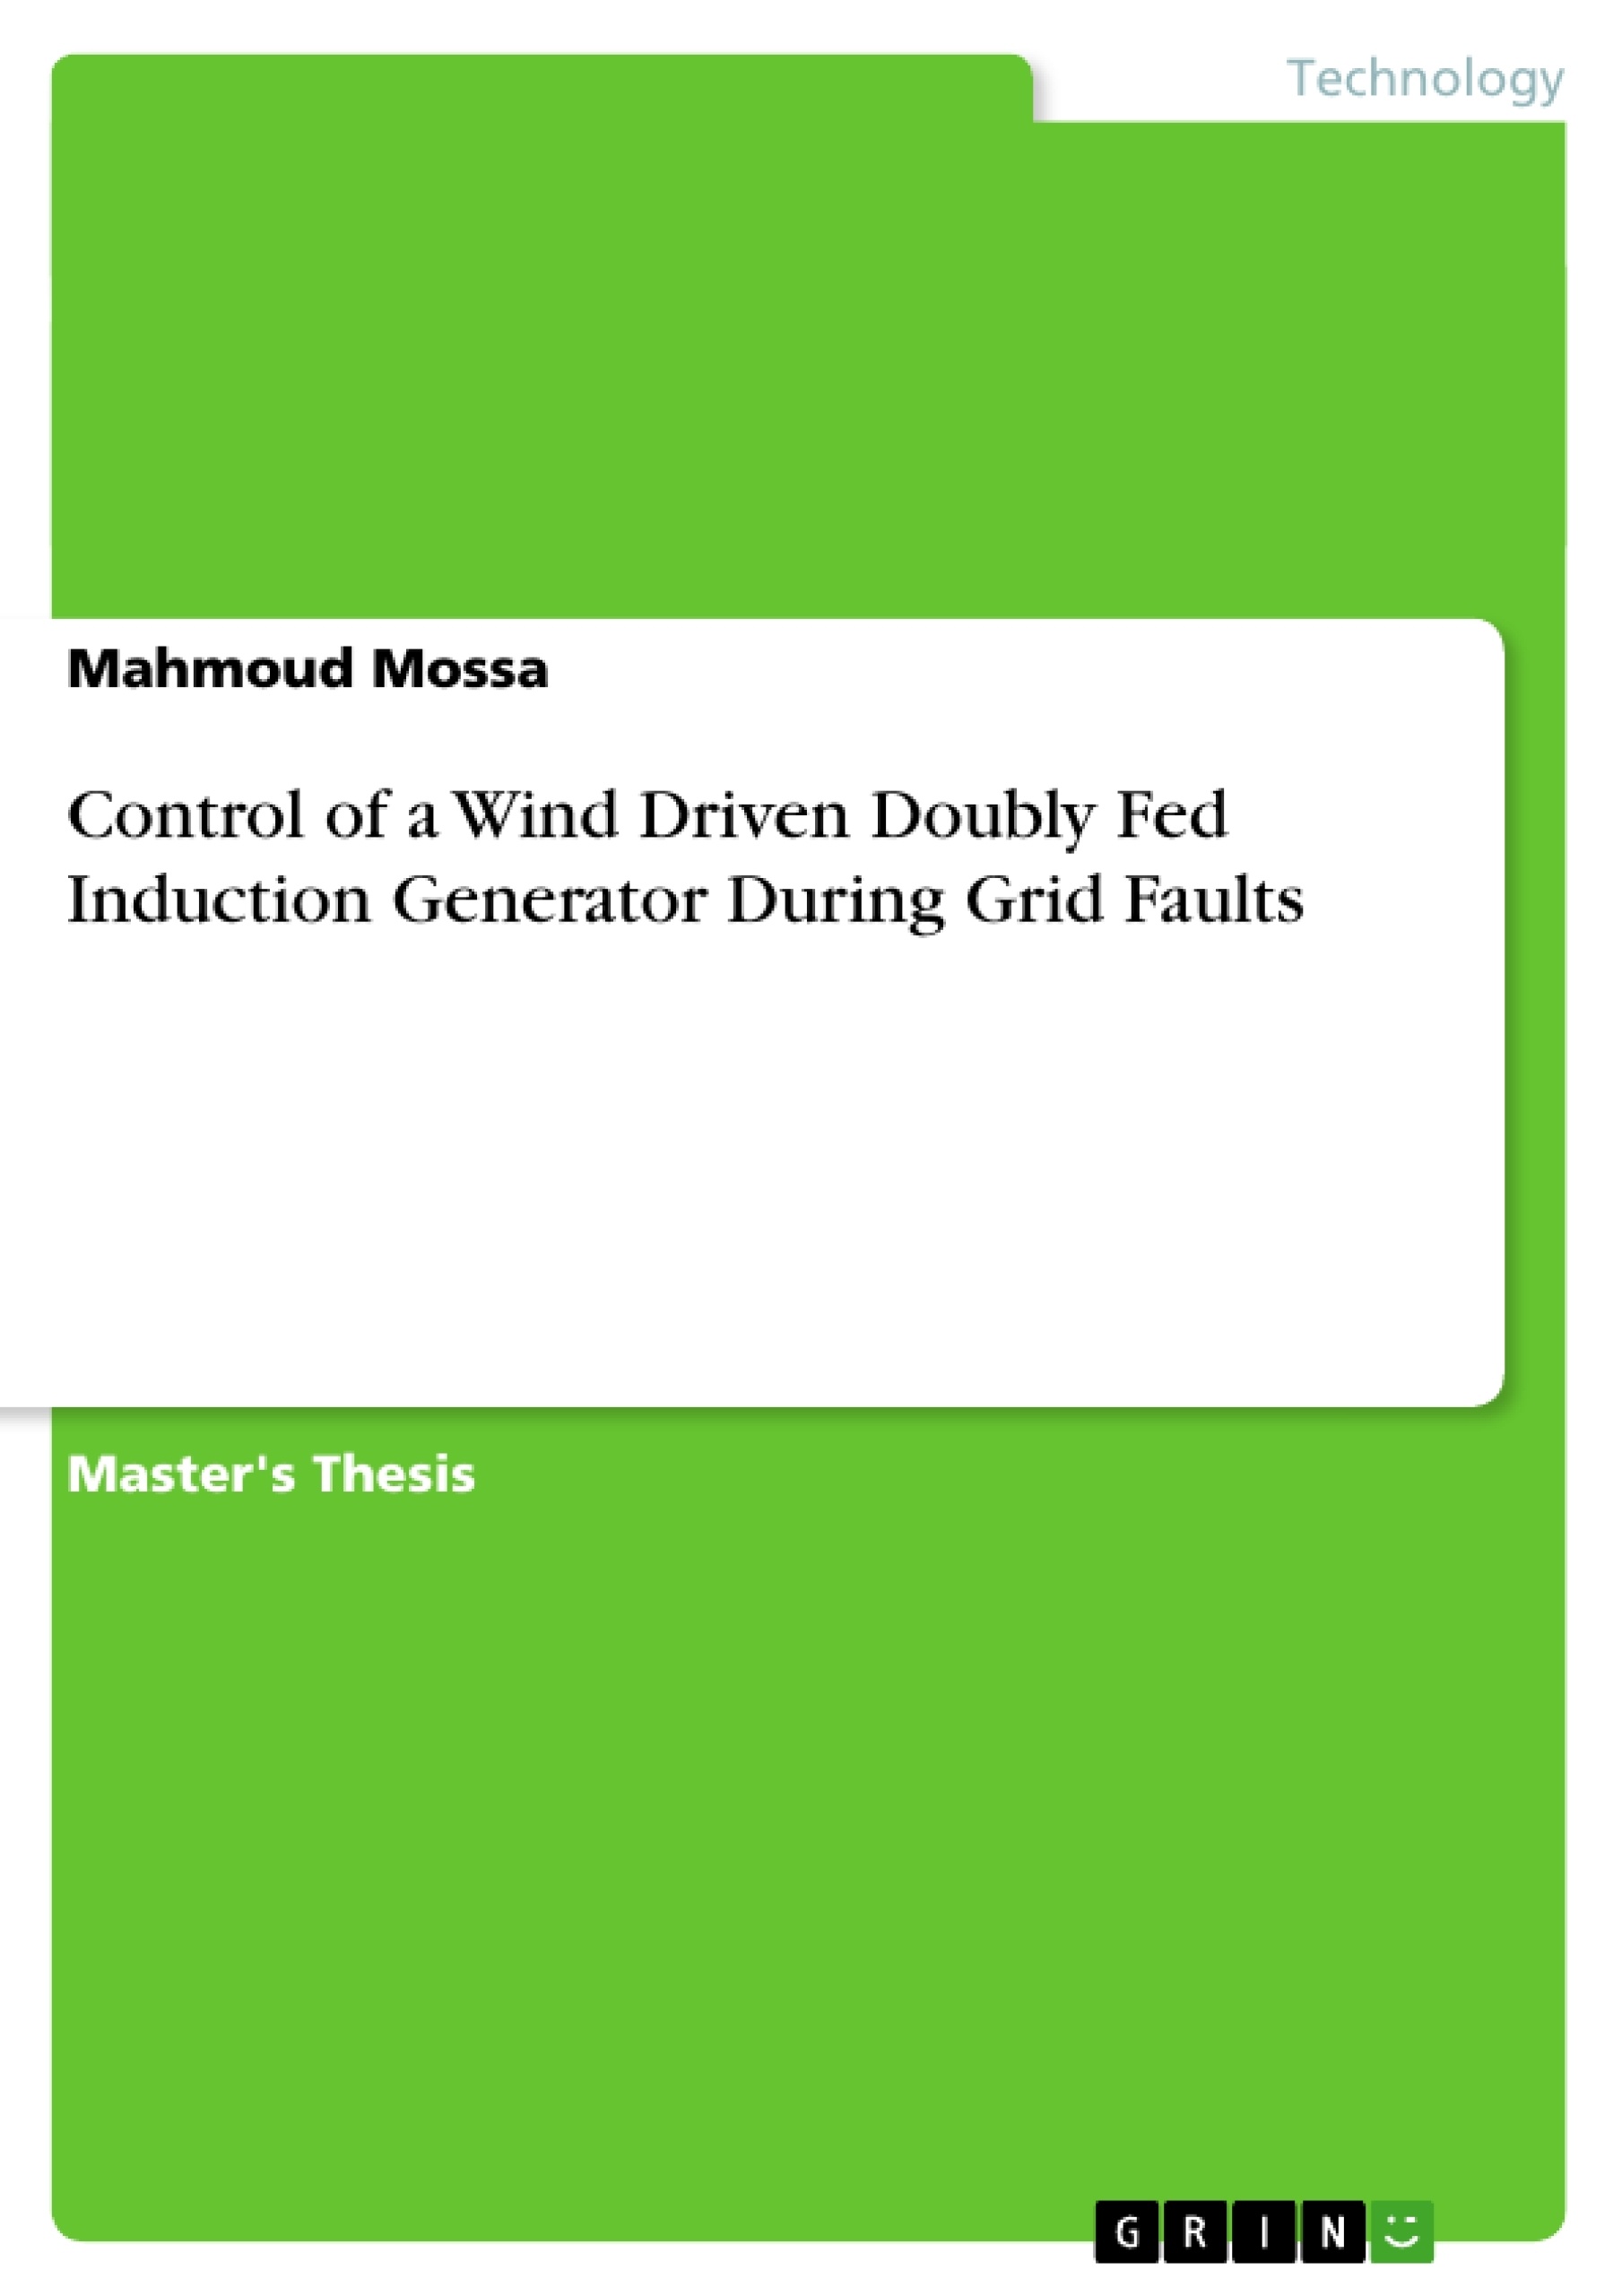 Doubly fed induction generators thesis